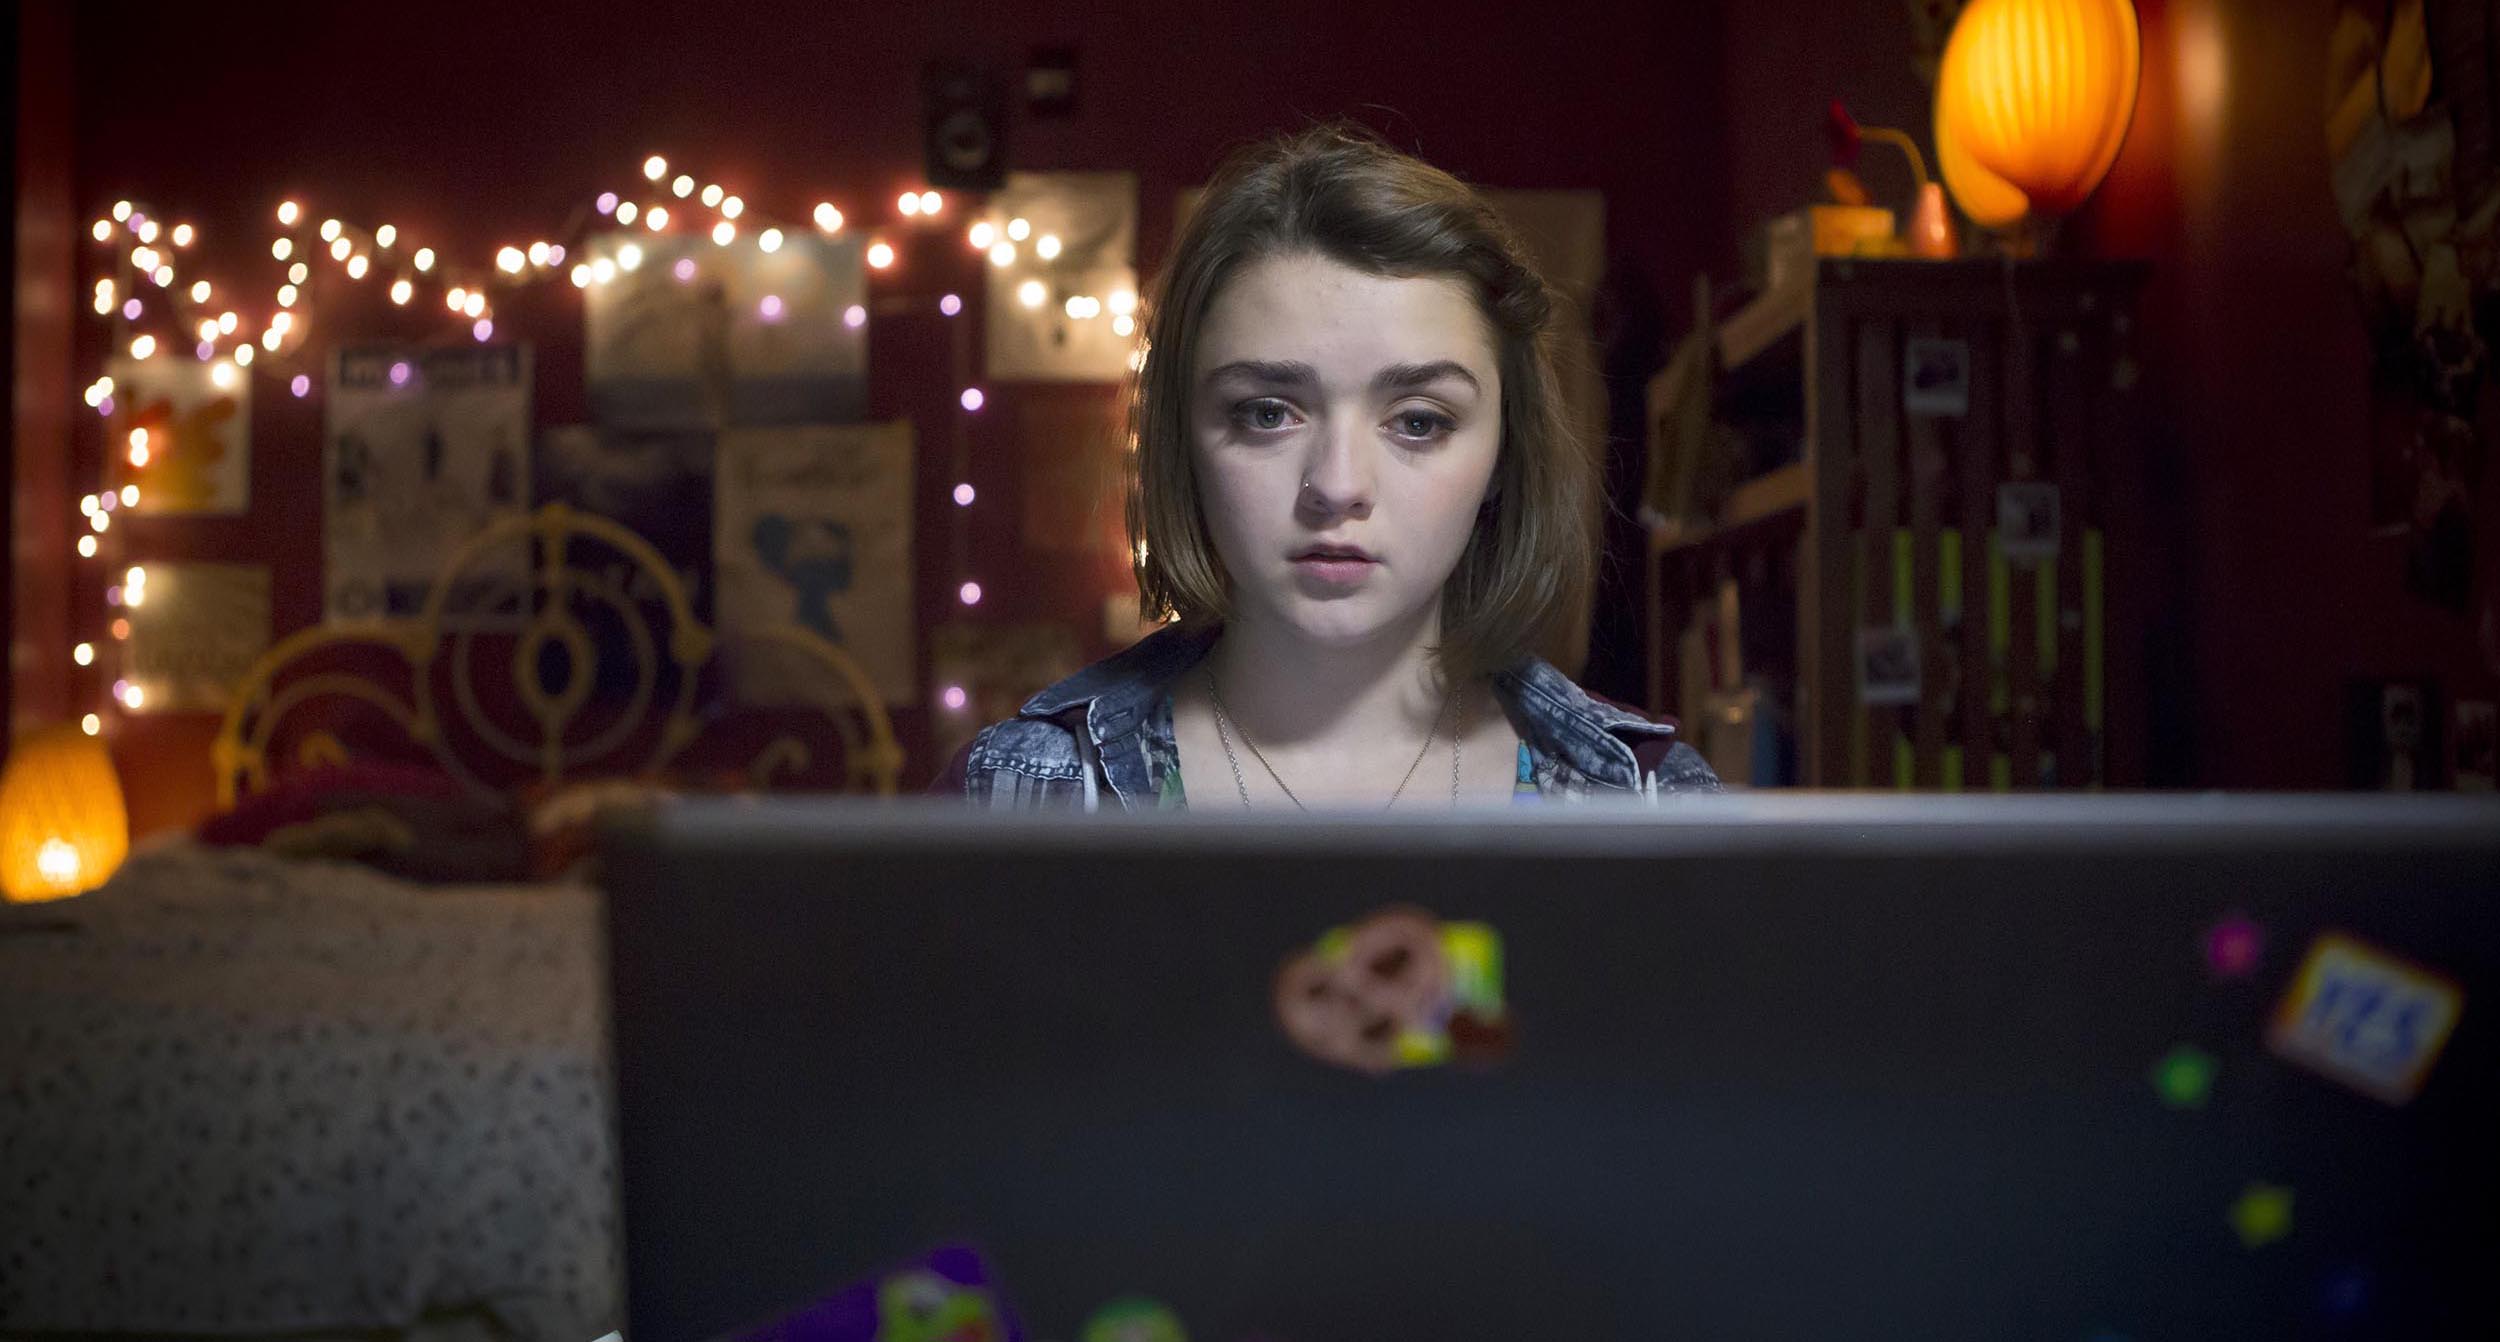 Game of Thrones' Maisie Williams explored cyber-bullying in Channel 4 drama, Cyberbully.